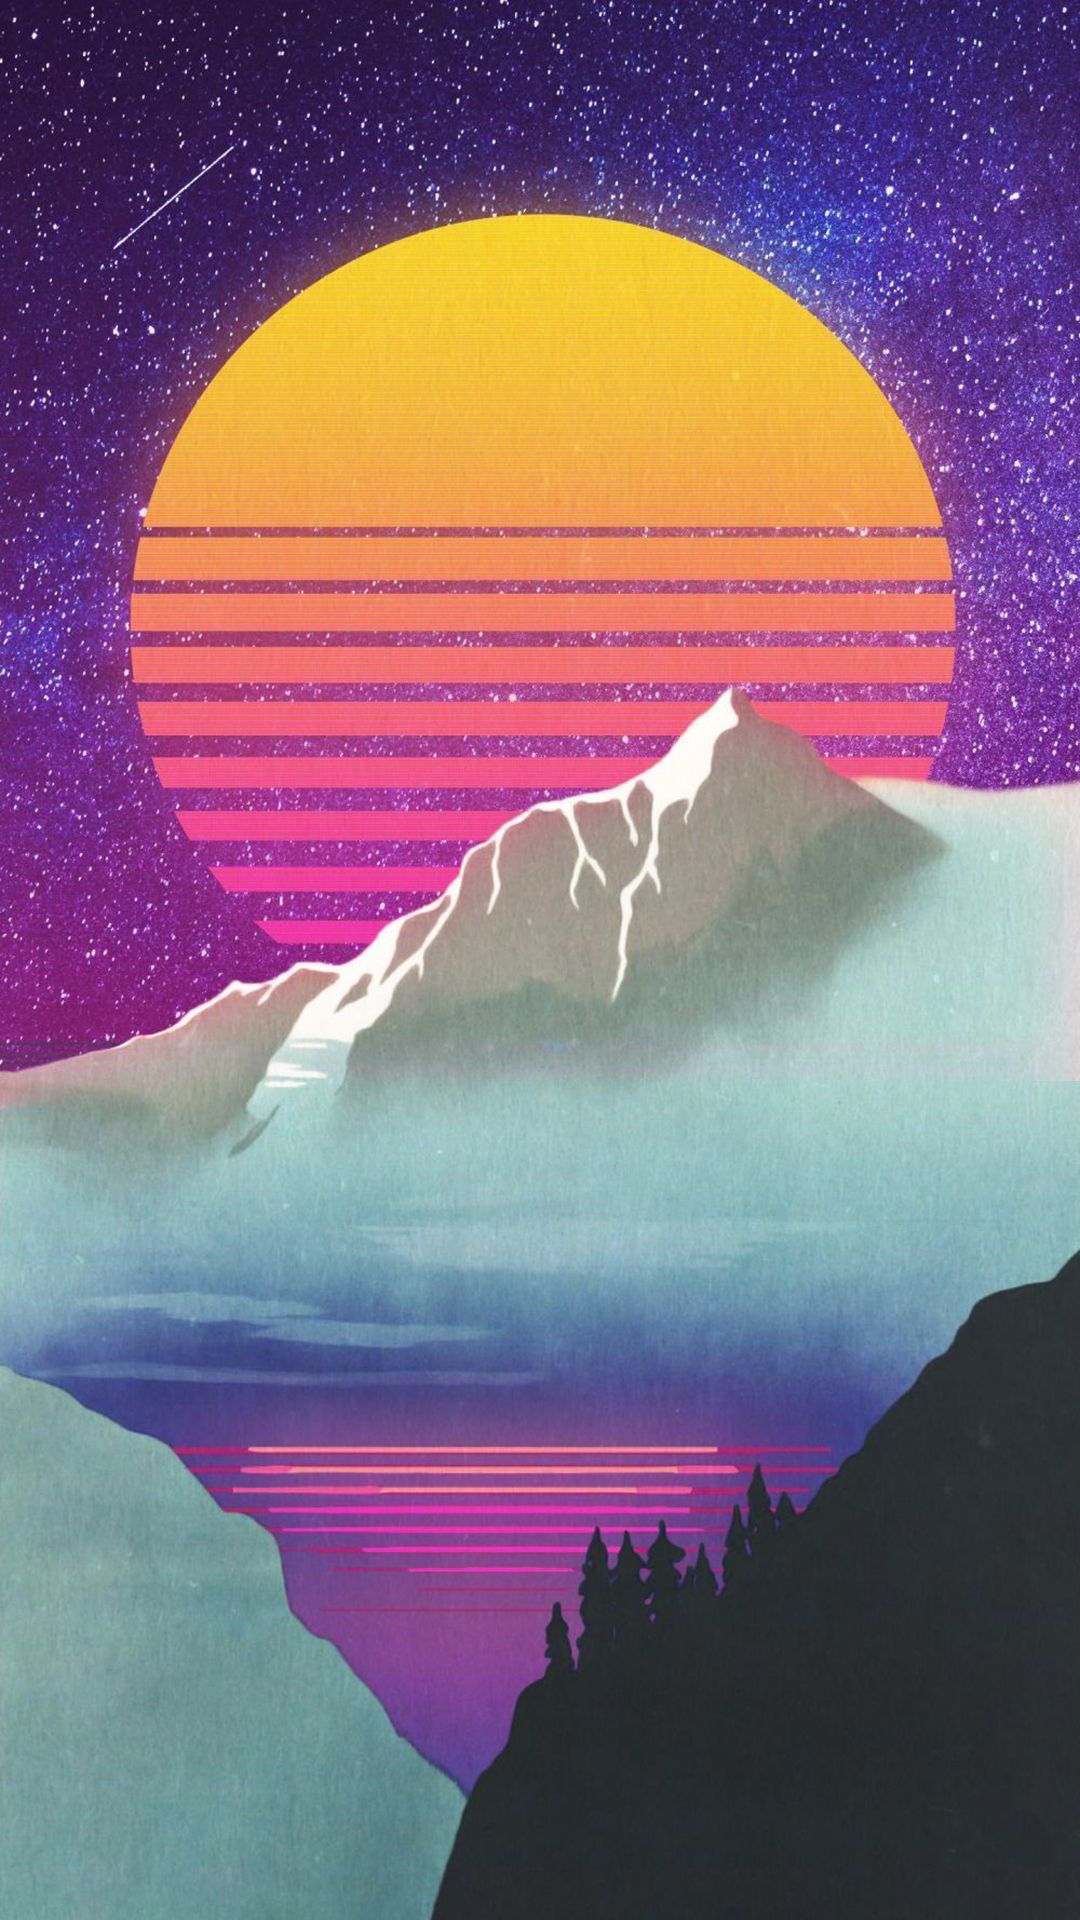 A sunset over the mountains with trees in front - 80s, 70s, art, retro, Android